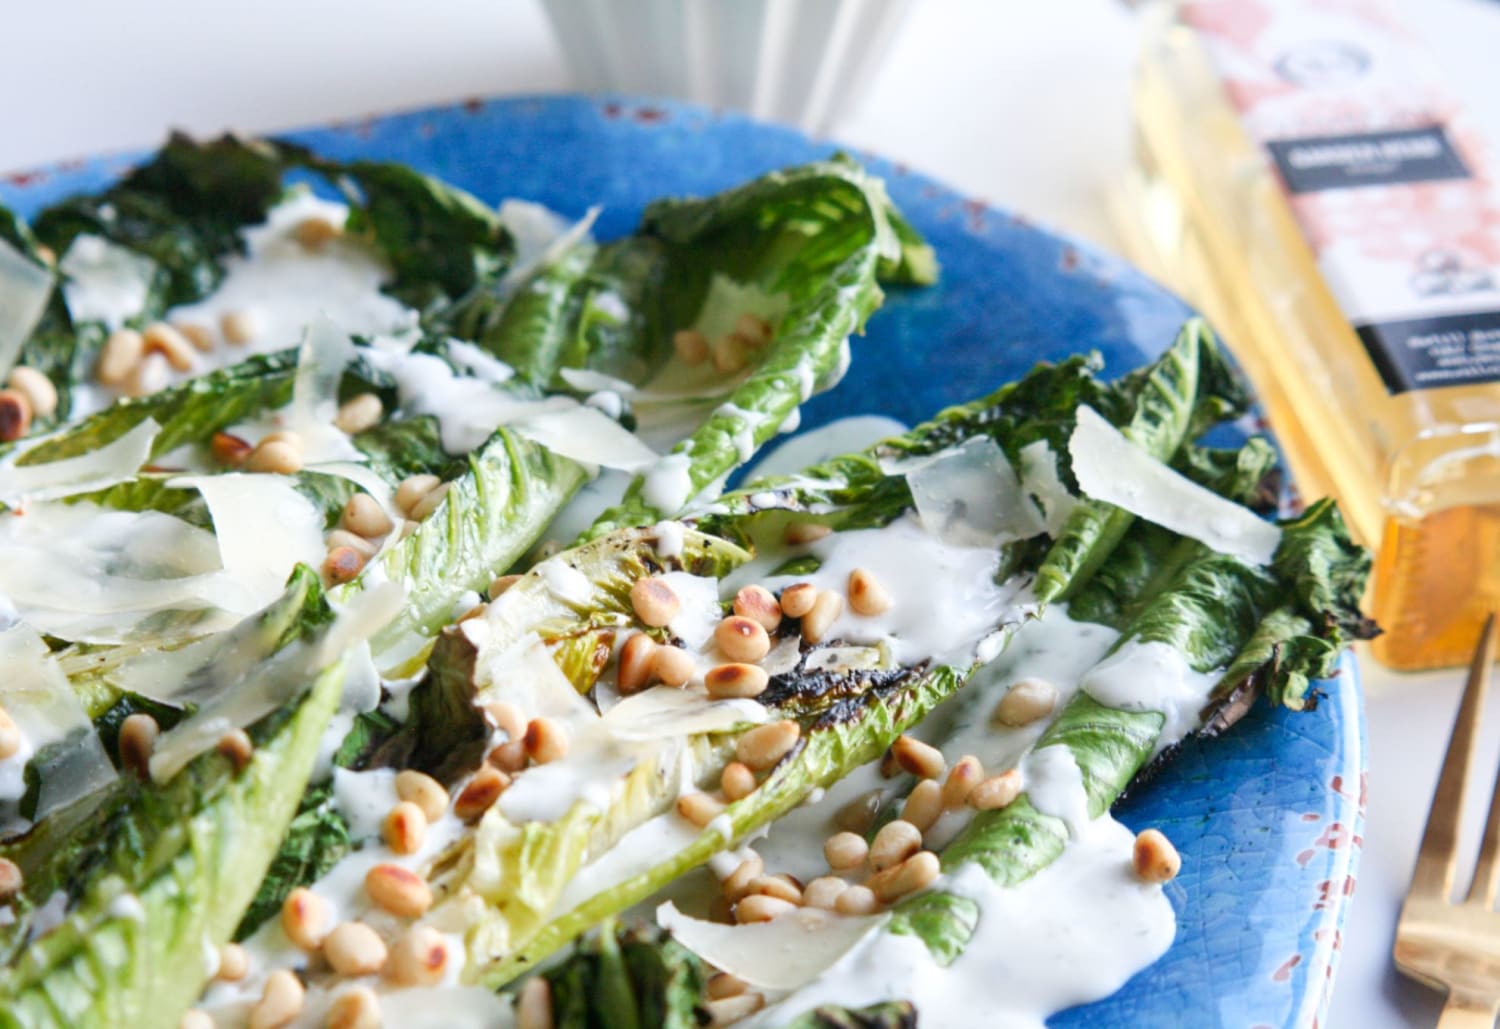 Grilled Romaine Salad with Herb Dressing